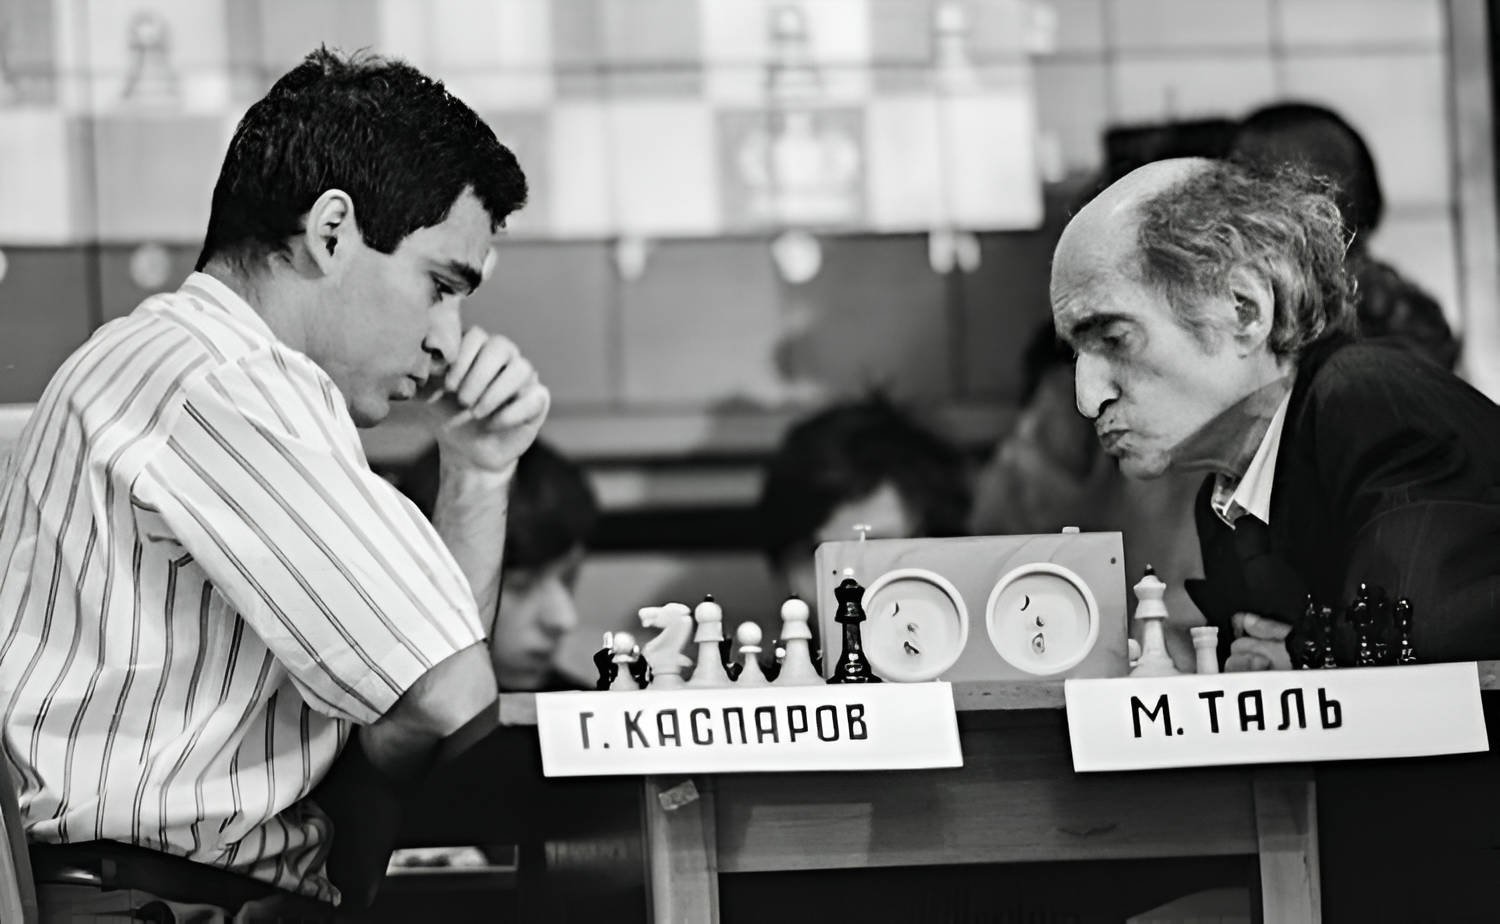 10 year old Garry Kasparov plays Mikhail Tal at a simul in Moscow 25th  March 1974 : r/chess